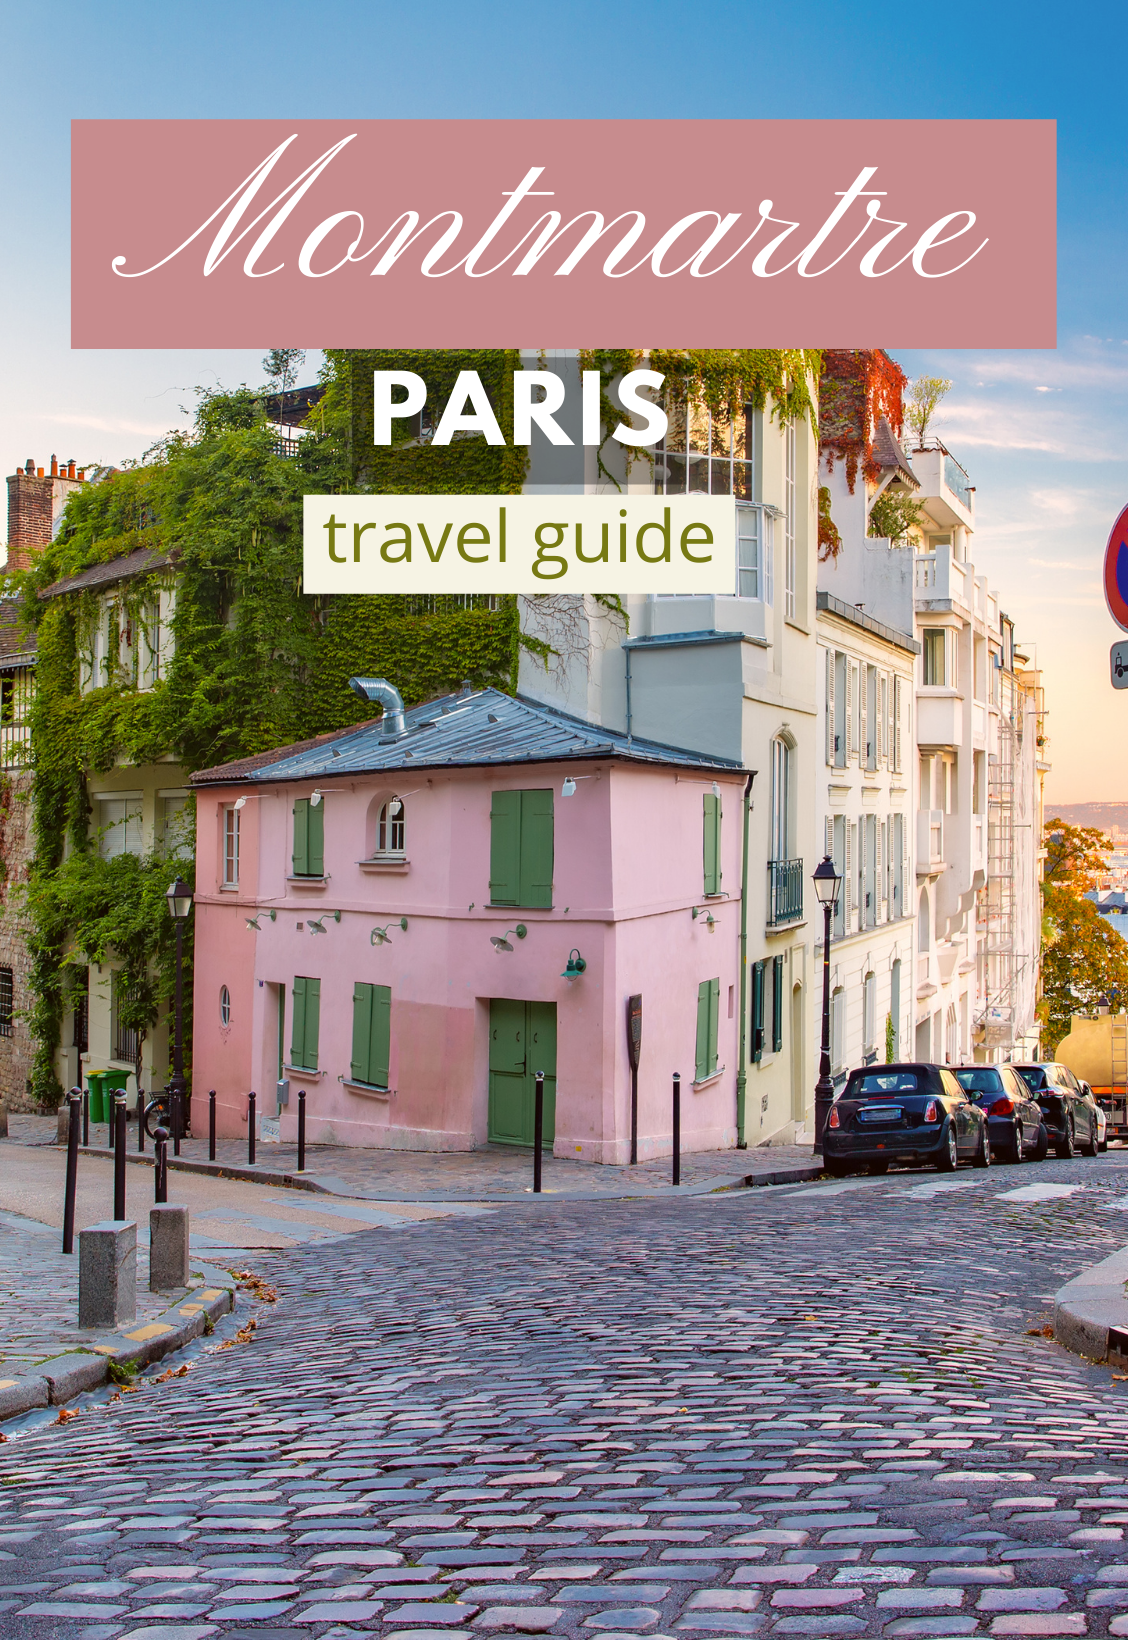 Things to do in Montmartre, Paris